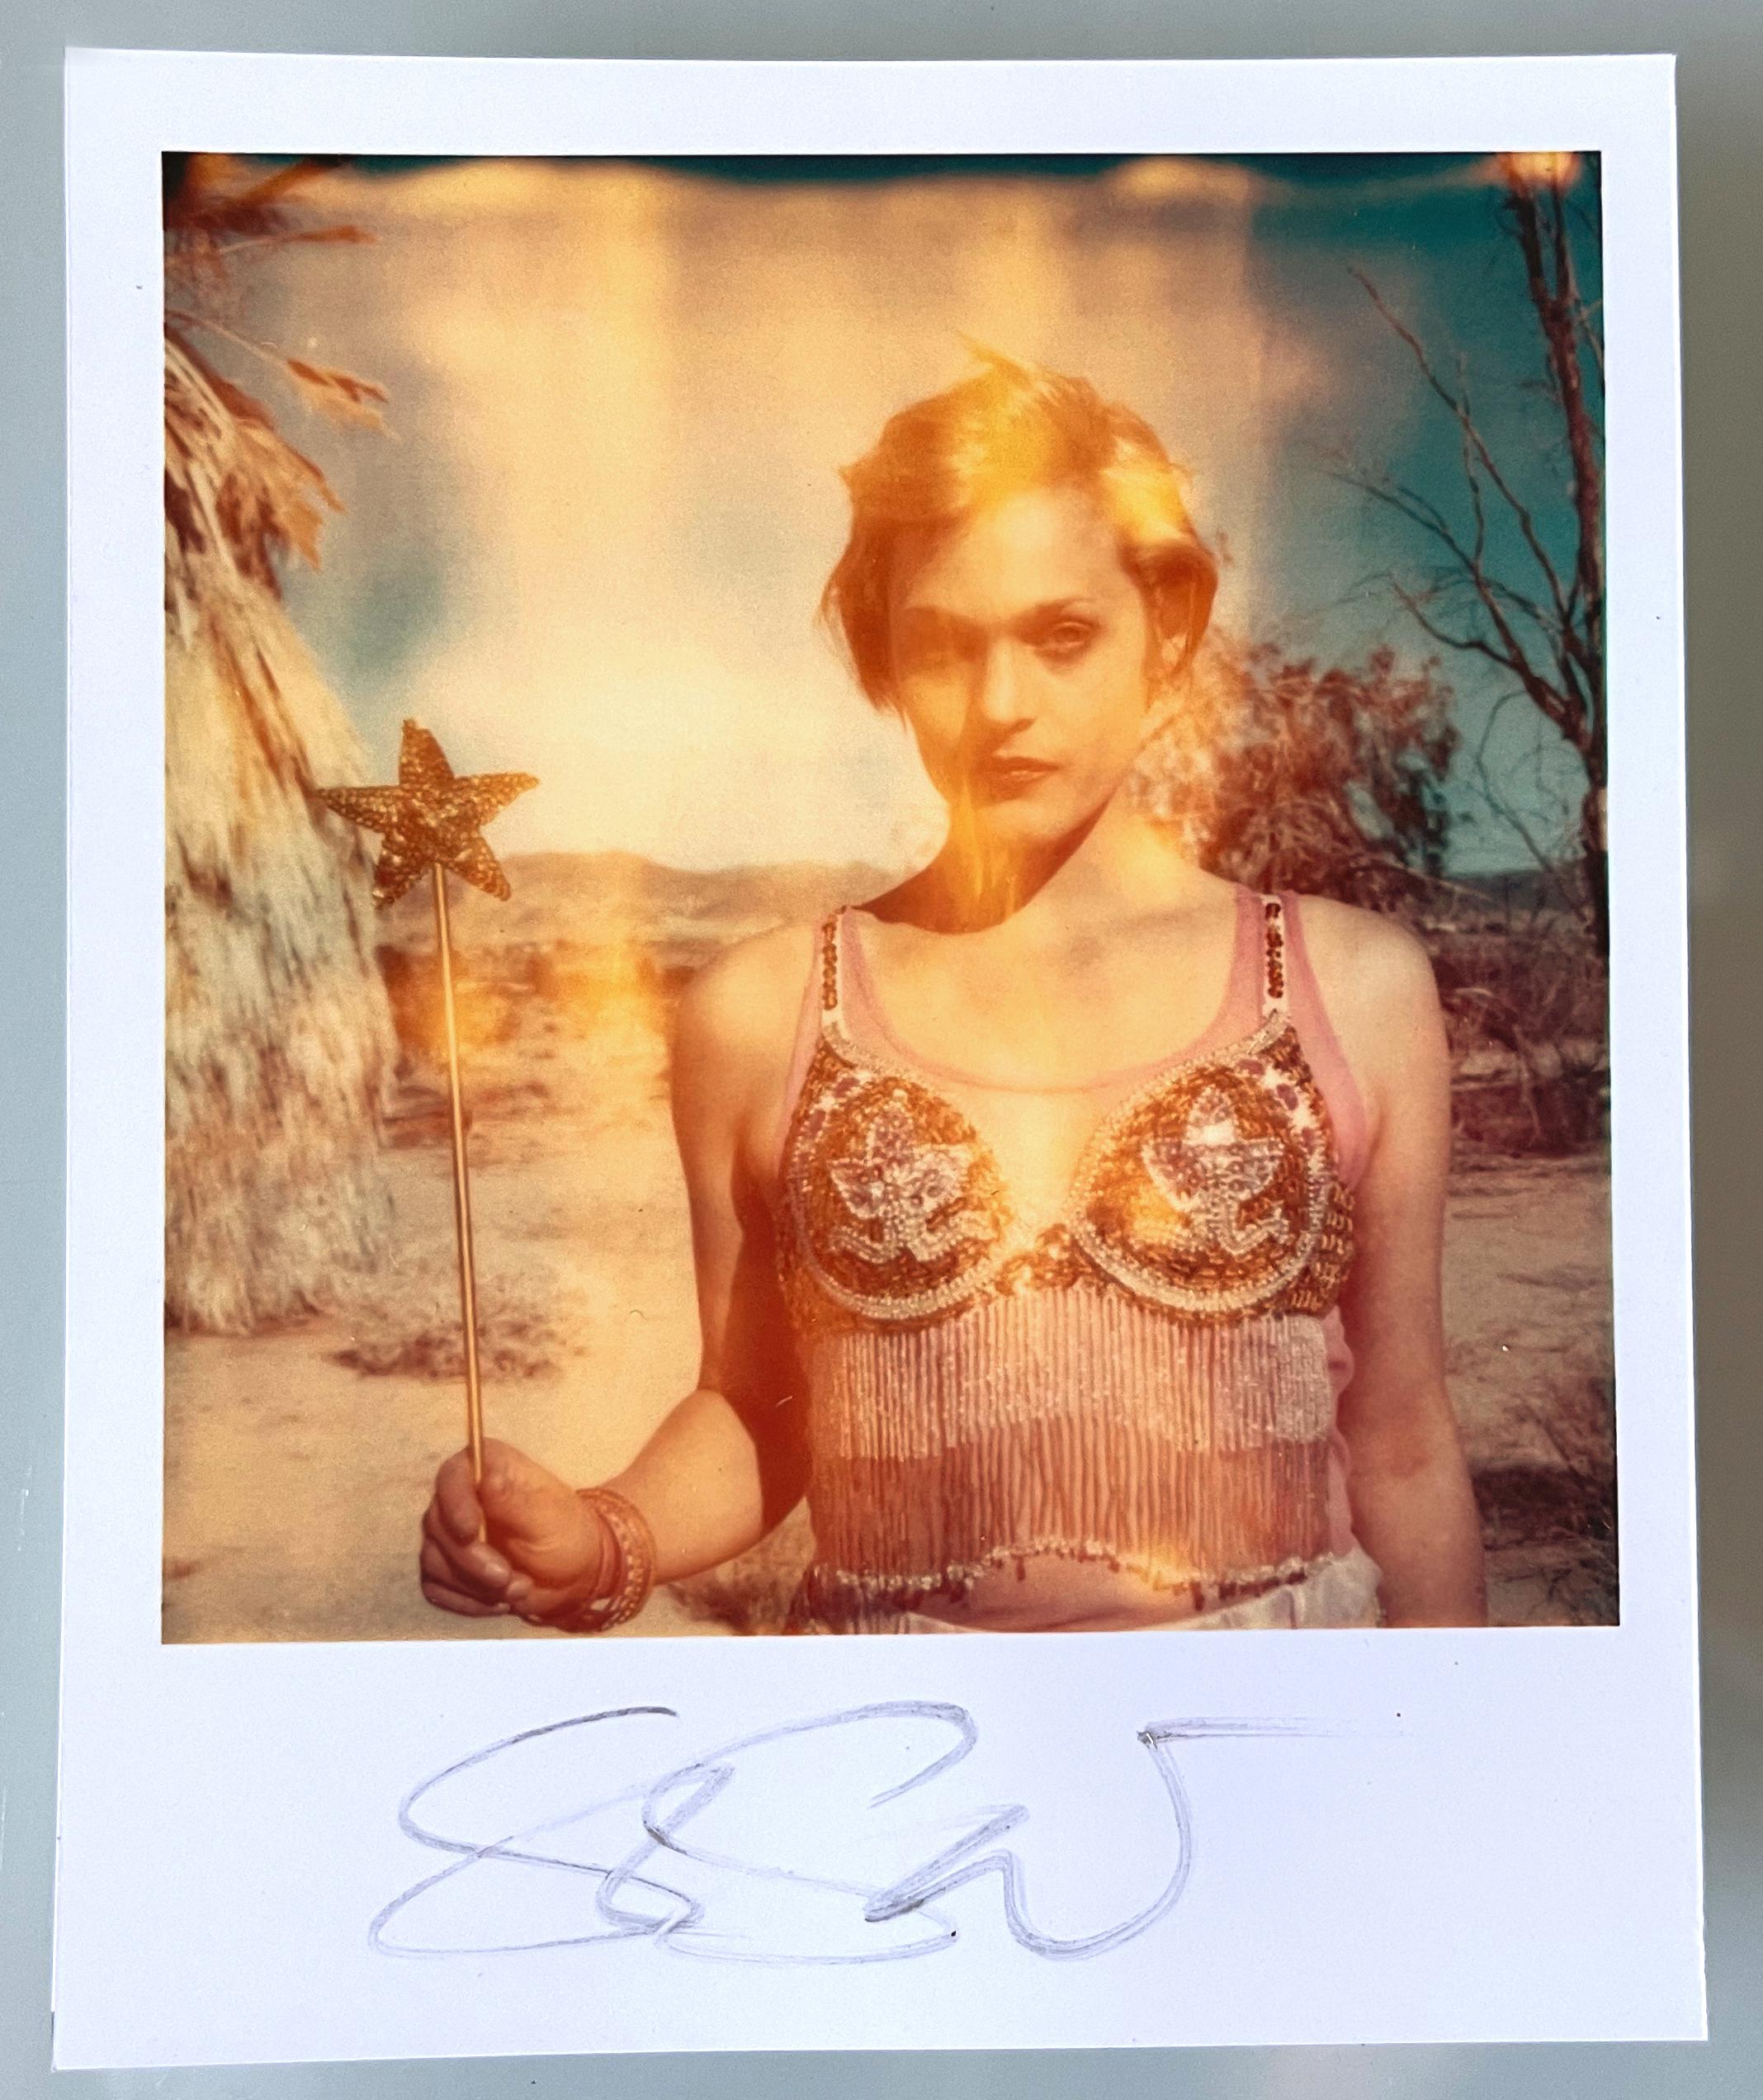 Stefanie Schneider Polaroid sized unlimited Mini 'The Muse' - 2009 - 

signed in front, not mounted. 
1 Digital Color Photographs based on a Polaroid. 

Polaroid sized open Editions 1999-2016
10.7 x 8.8cm (Image 7.9x7.7cm) each.

Stefanie Schneider